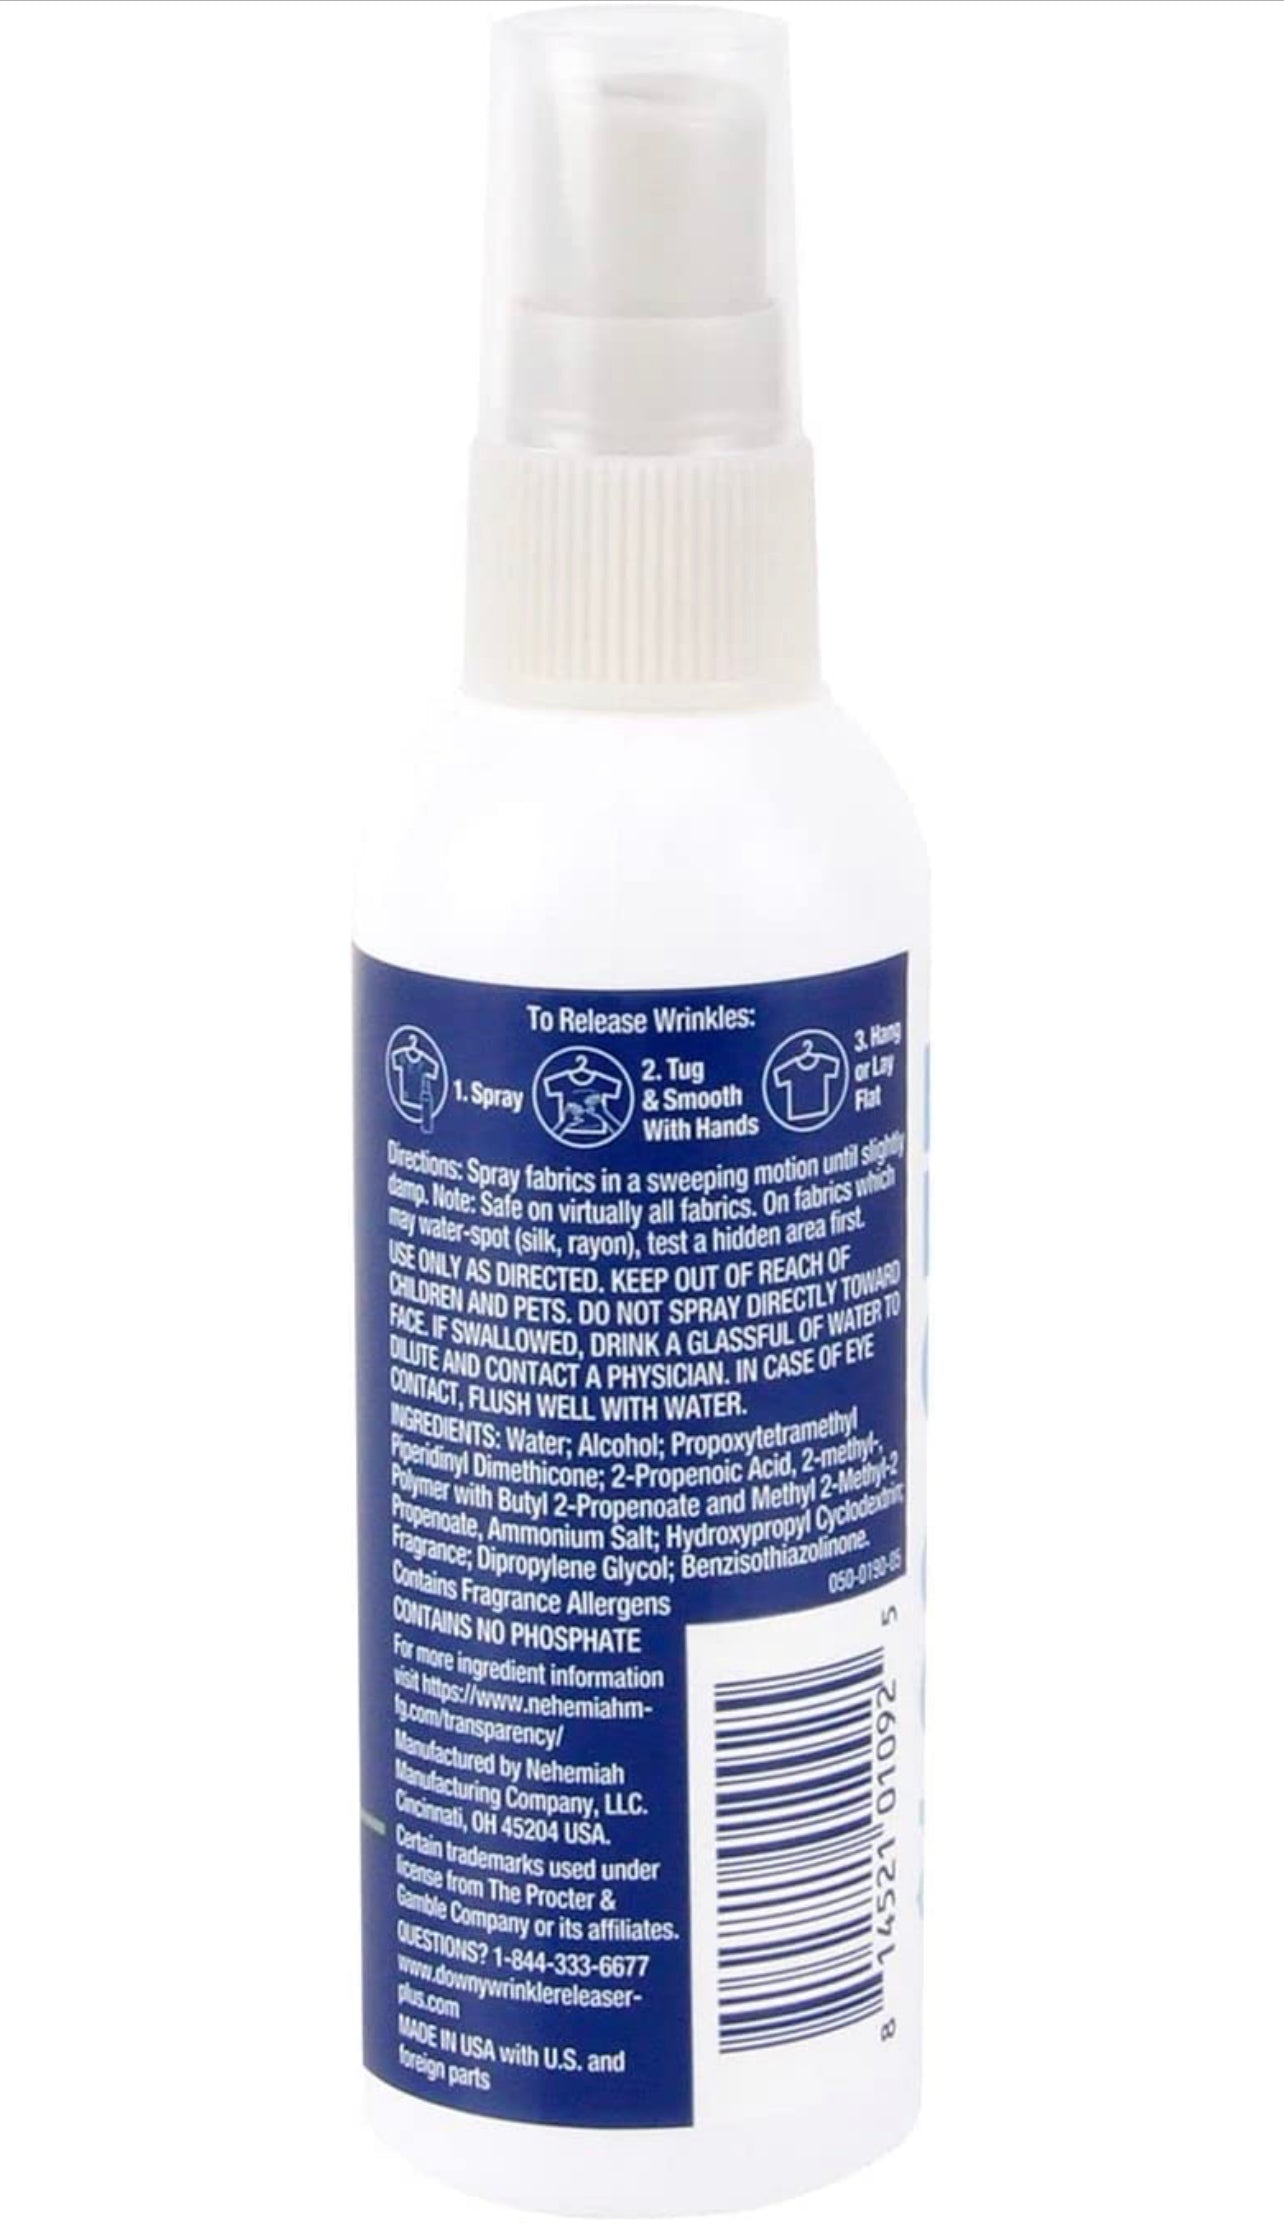  Cold Iron Wrinkle Release Spray for Clothes. Atlas Travel Size  3 fl oz/89 ml. Fragrance Free. Fast, Easy to Use Ironing Alternative.  Spray, Smooth, Hang. Award Winning for People on The